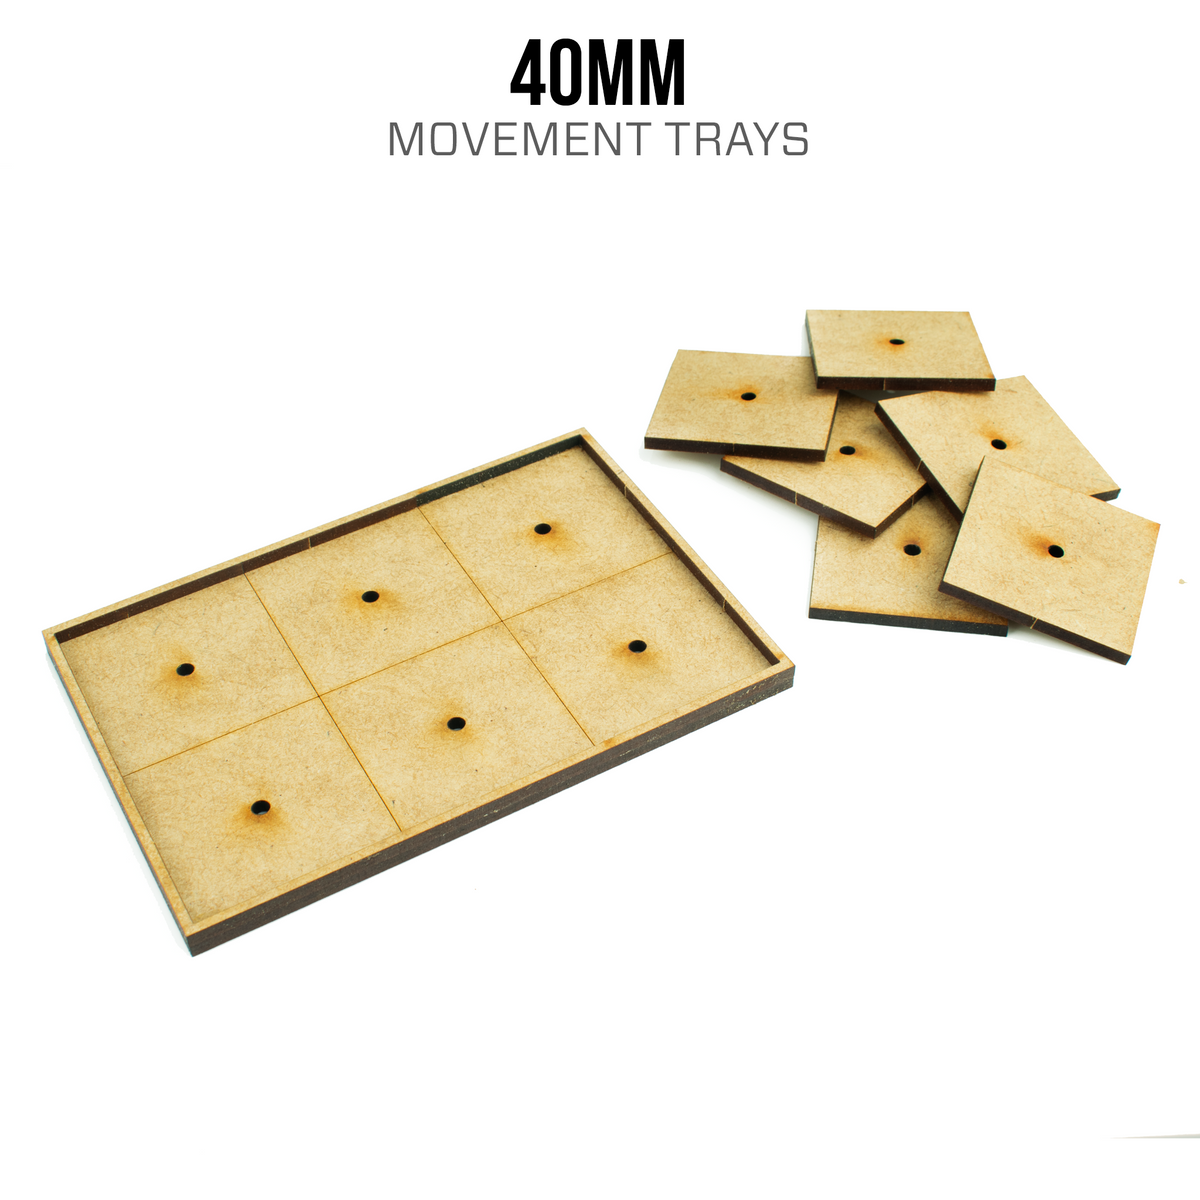 40mm Monstrous Infantry Movement Trays